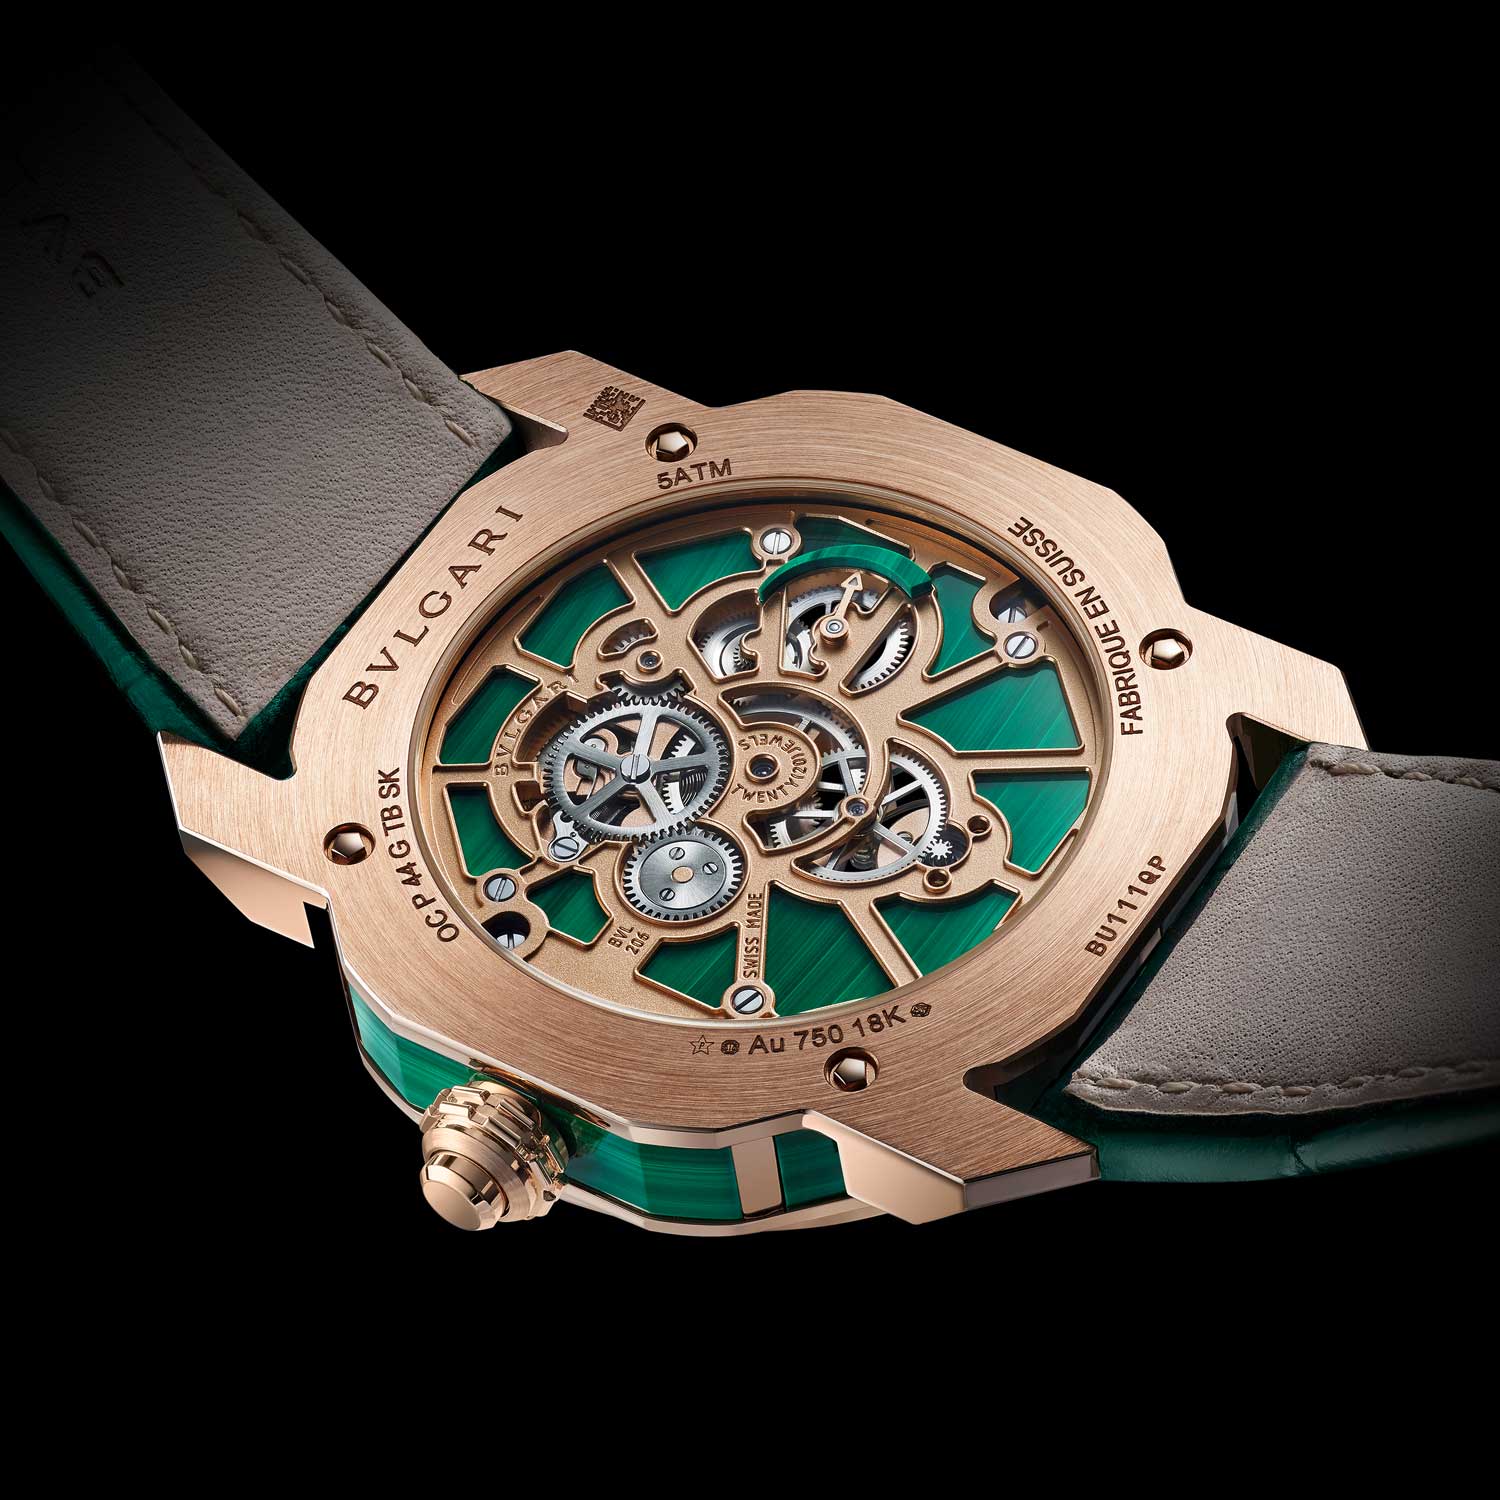 Bulgari has announced three models of Octo Roma Naturalia, in black onyx, lapis lazuli and malachite. All three watches are powered by the mechanical manufacture movement BVL 206